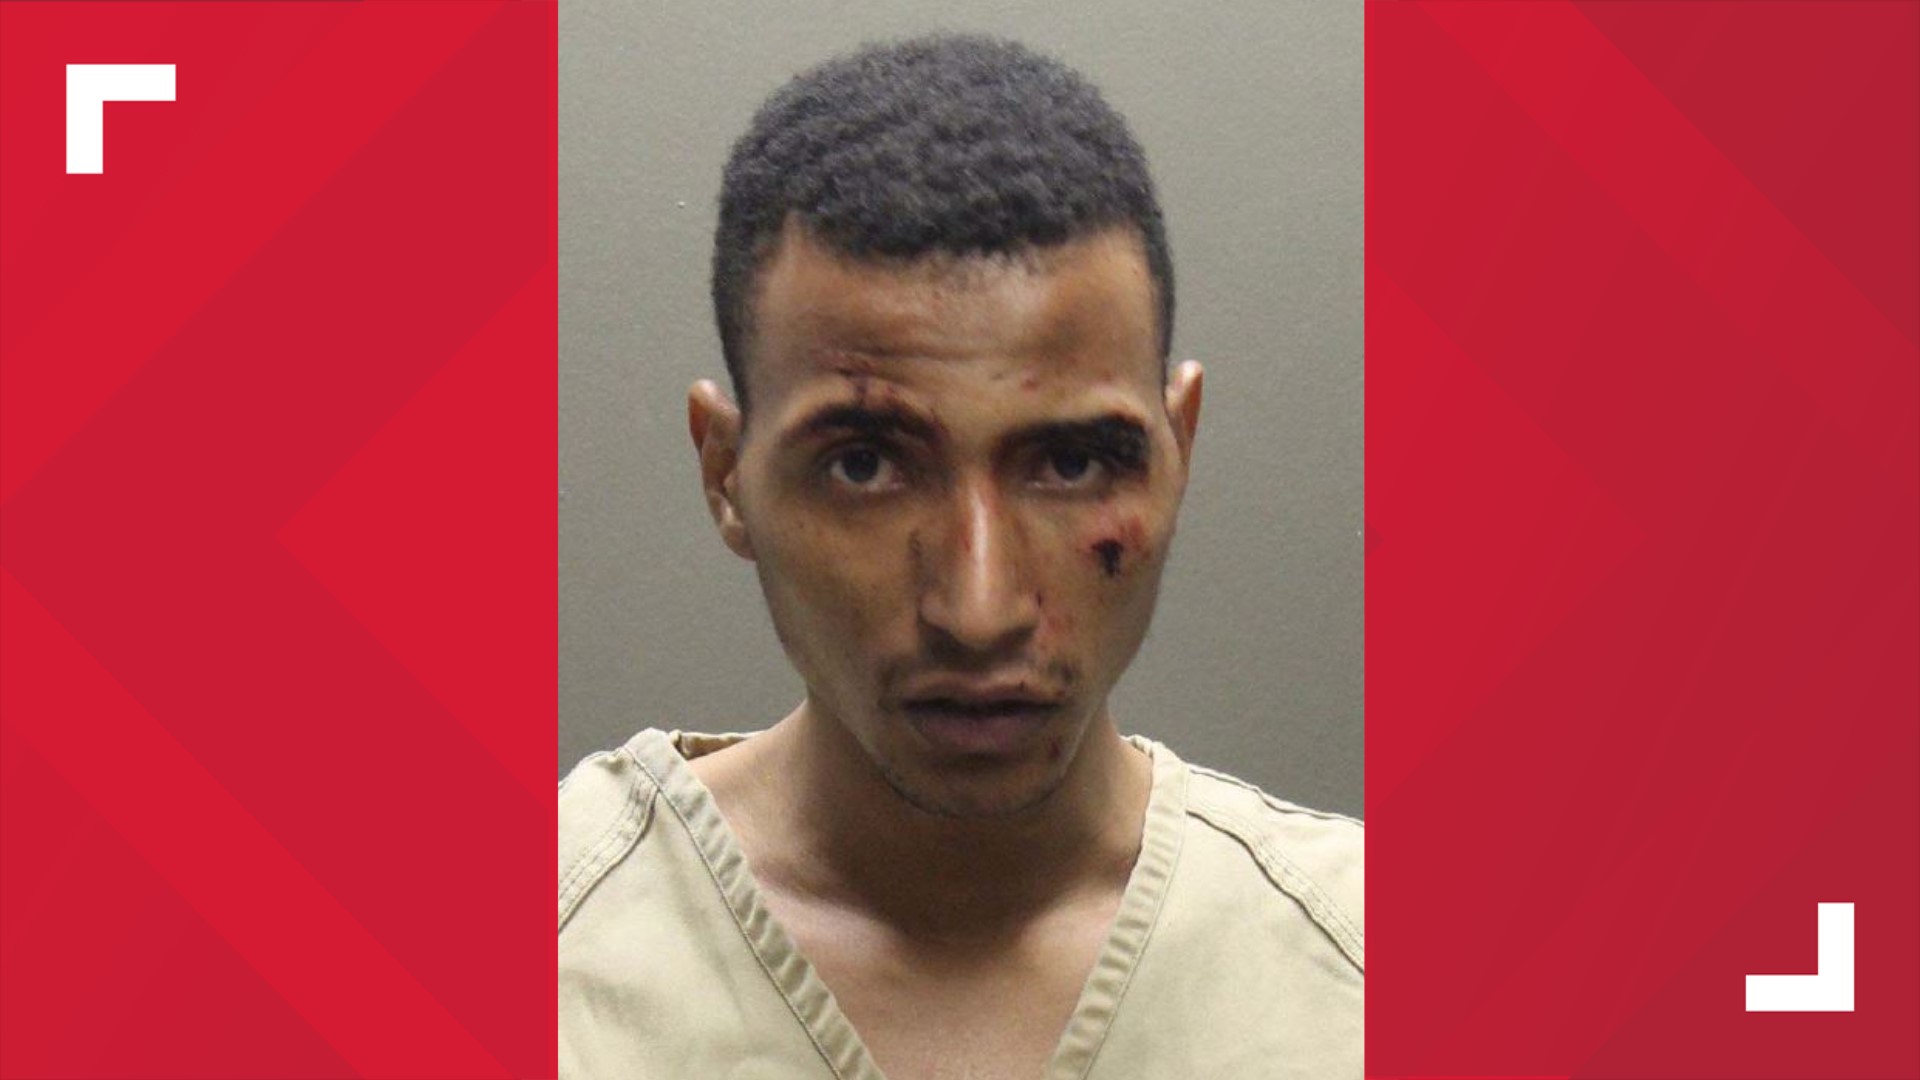 Mark Reynolds was sentenced to 21 years to life in prison after shooting several people over the course of two hours at various west Columbus locations.